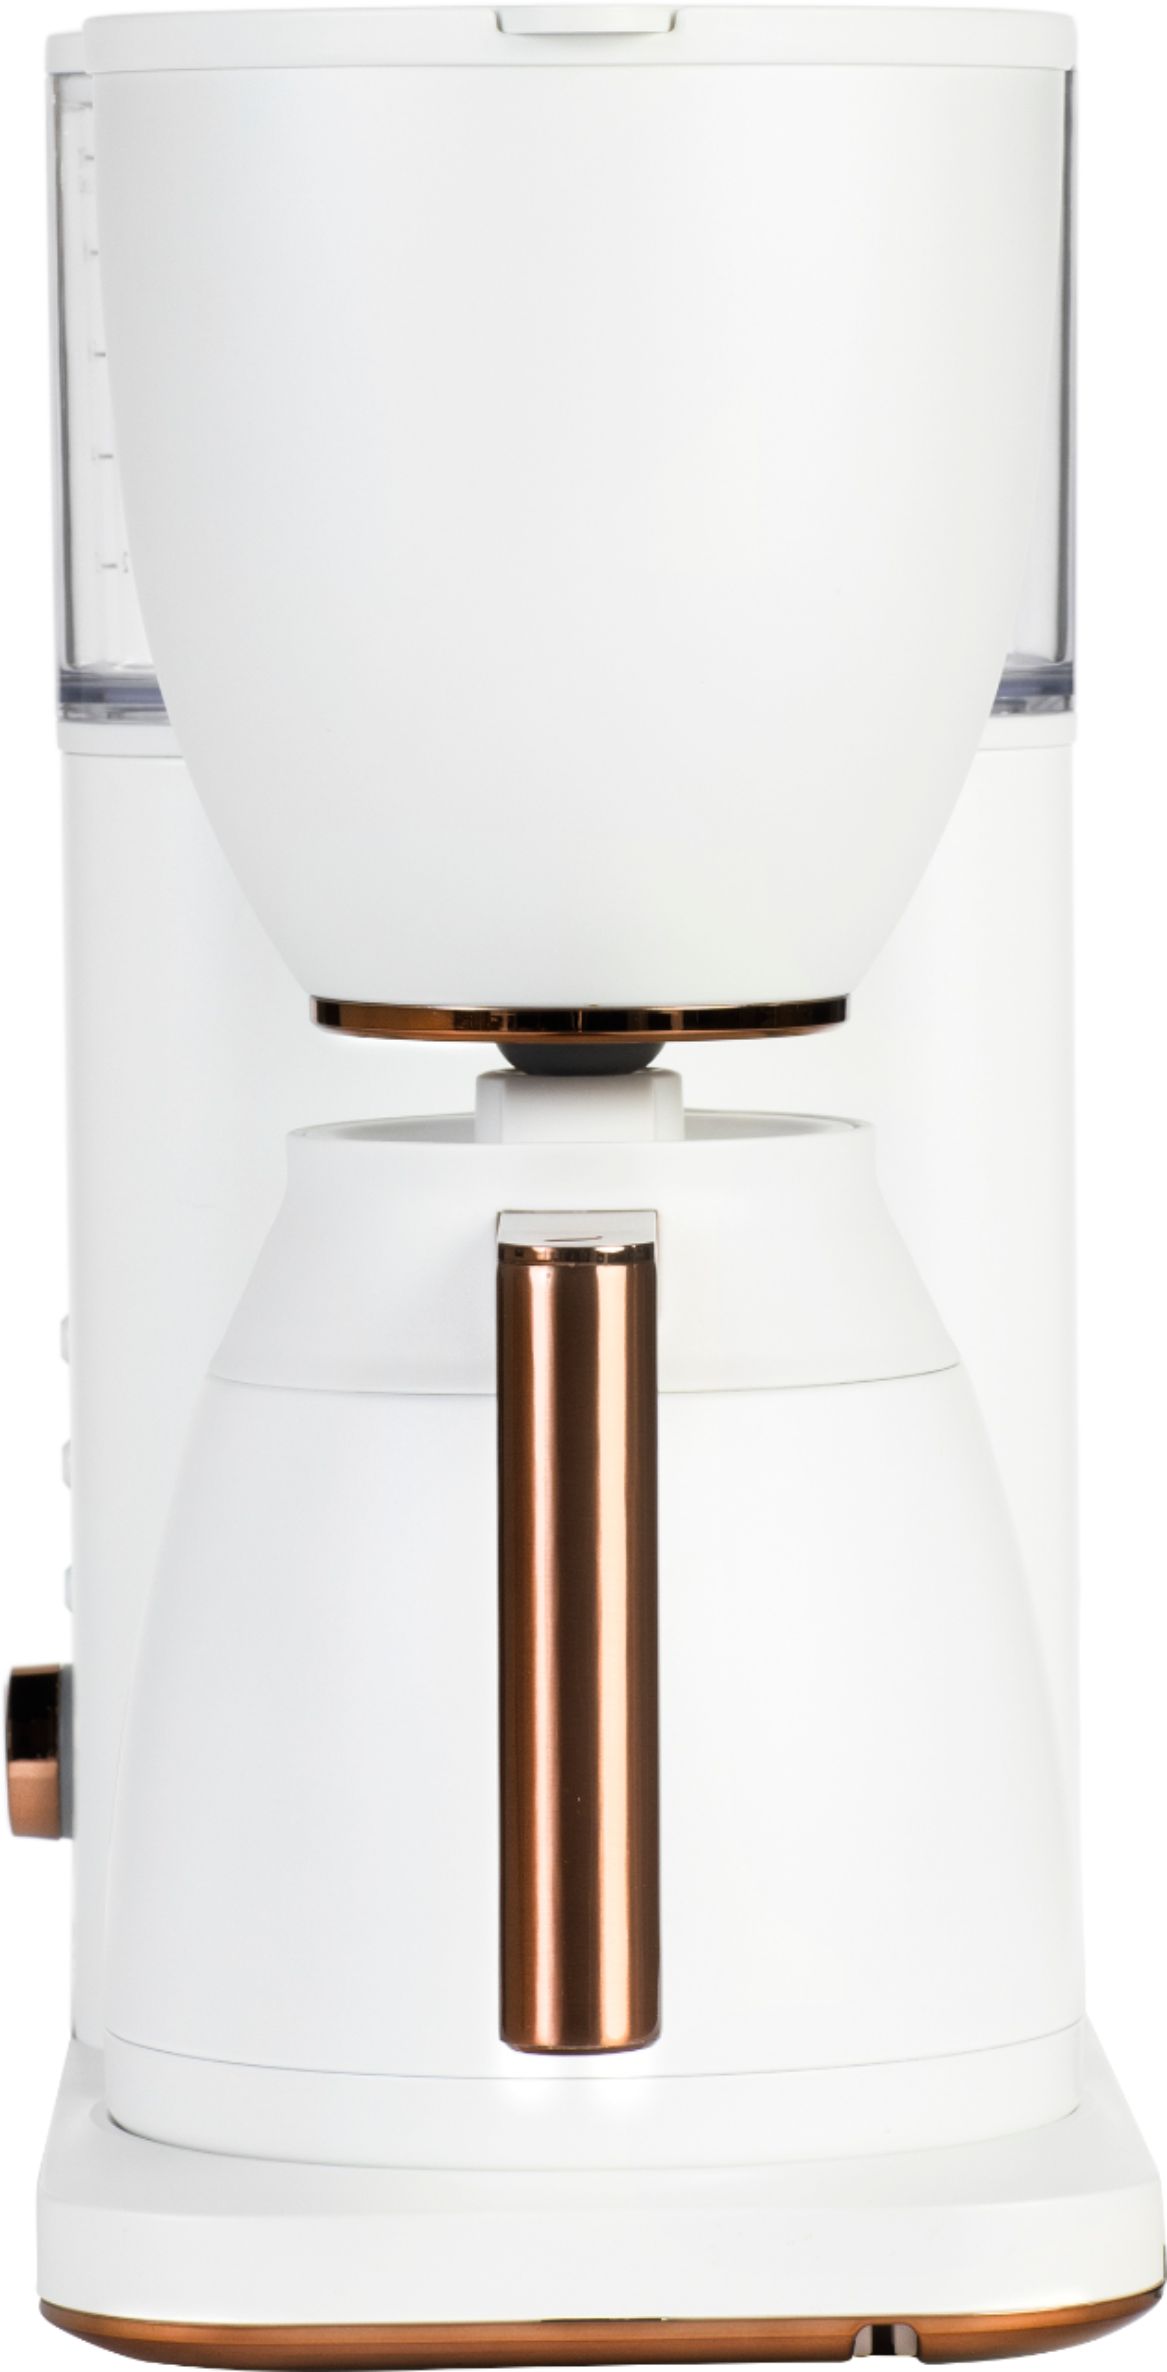 Cafe 10 Cup Matte White Specialty Drip Coffee Maker with Glass Carafe and  warming plate, Wi-Fi connected C7CDABS4RW3 - The Home Depot